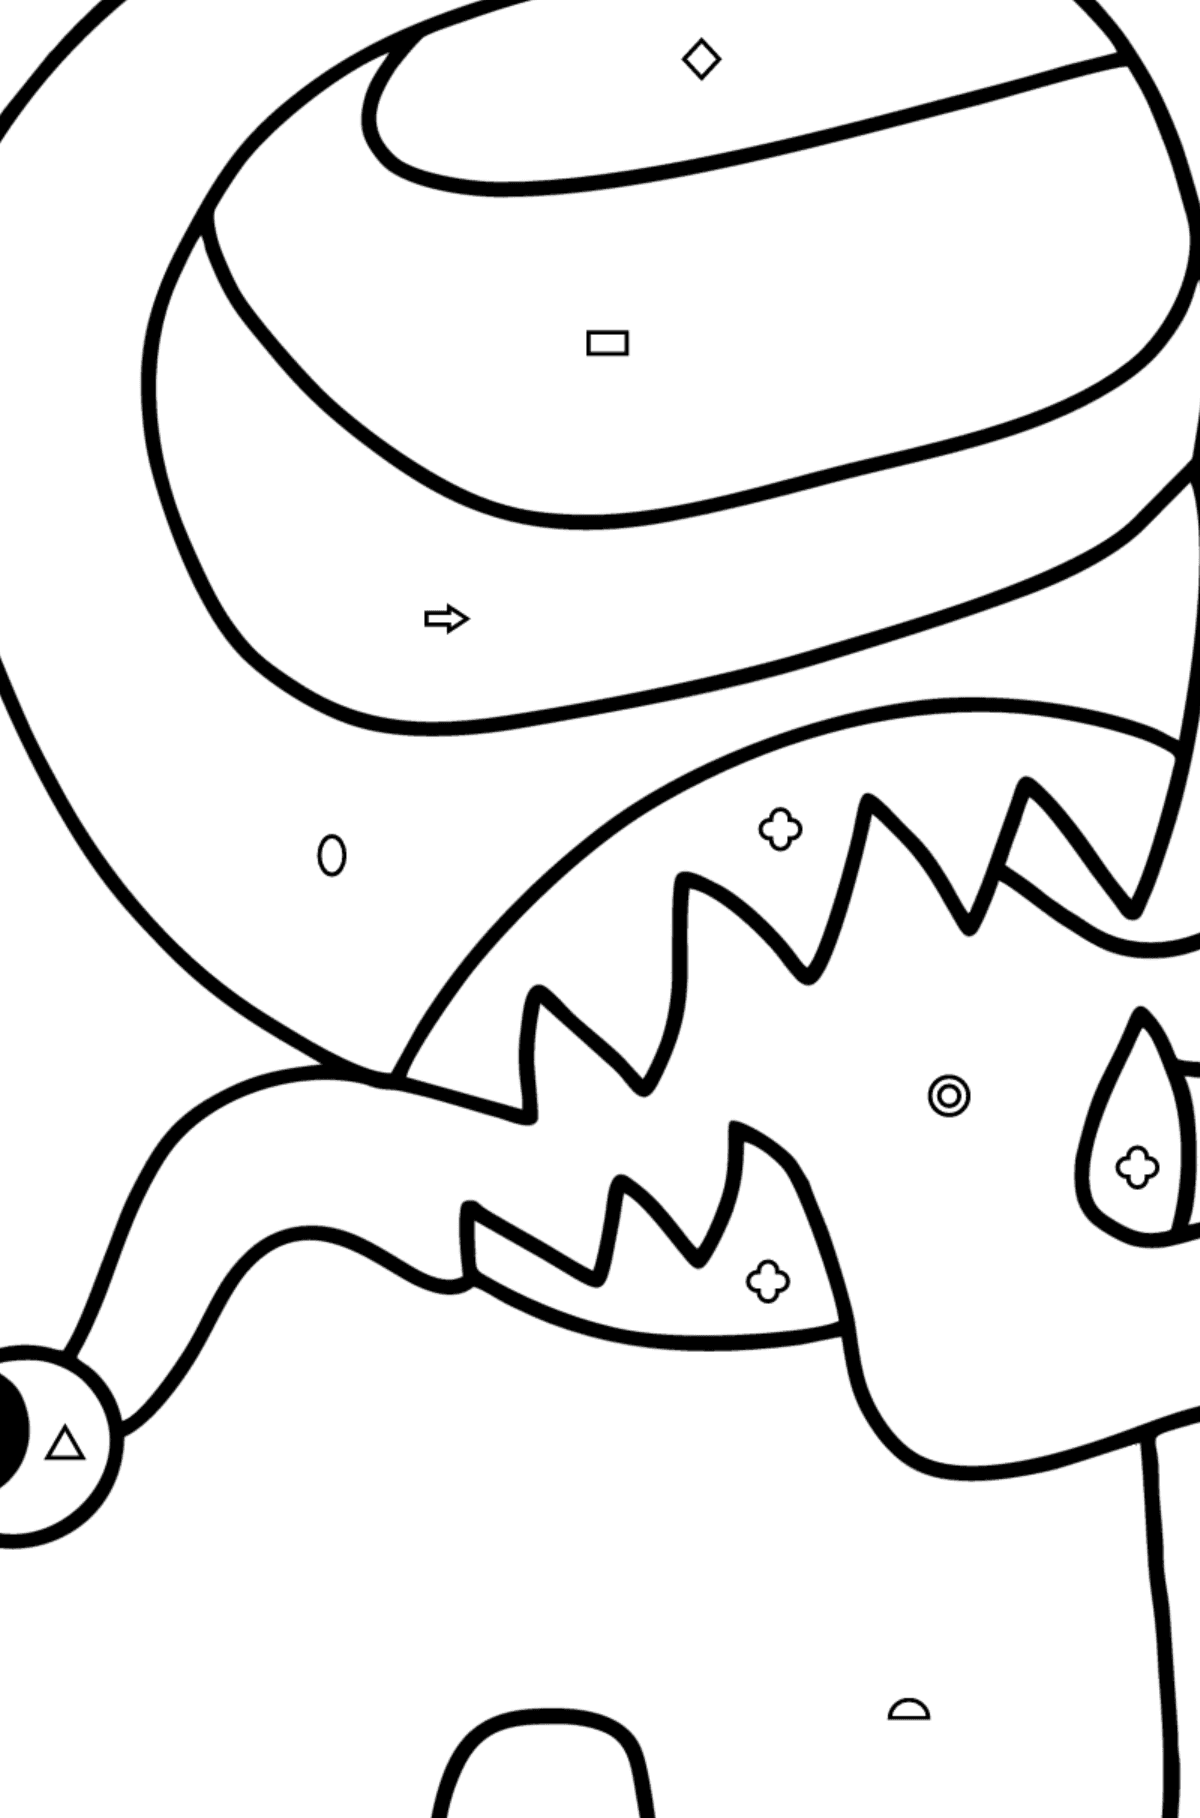 Among Us coloring page for Free - Coloring by Geometric Shapes for Kids